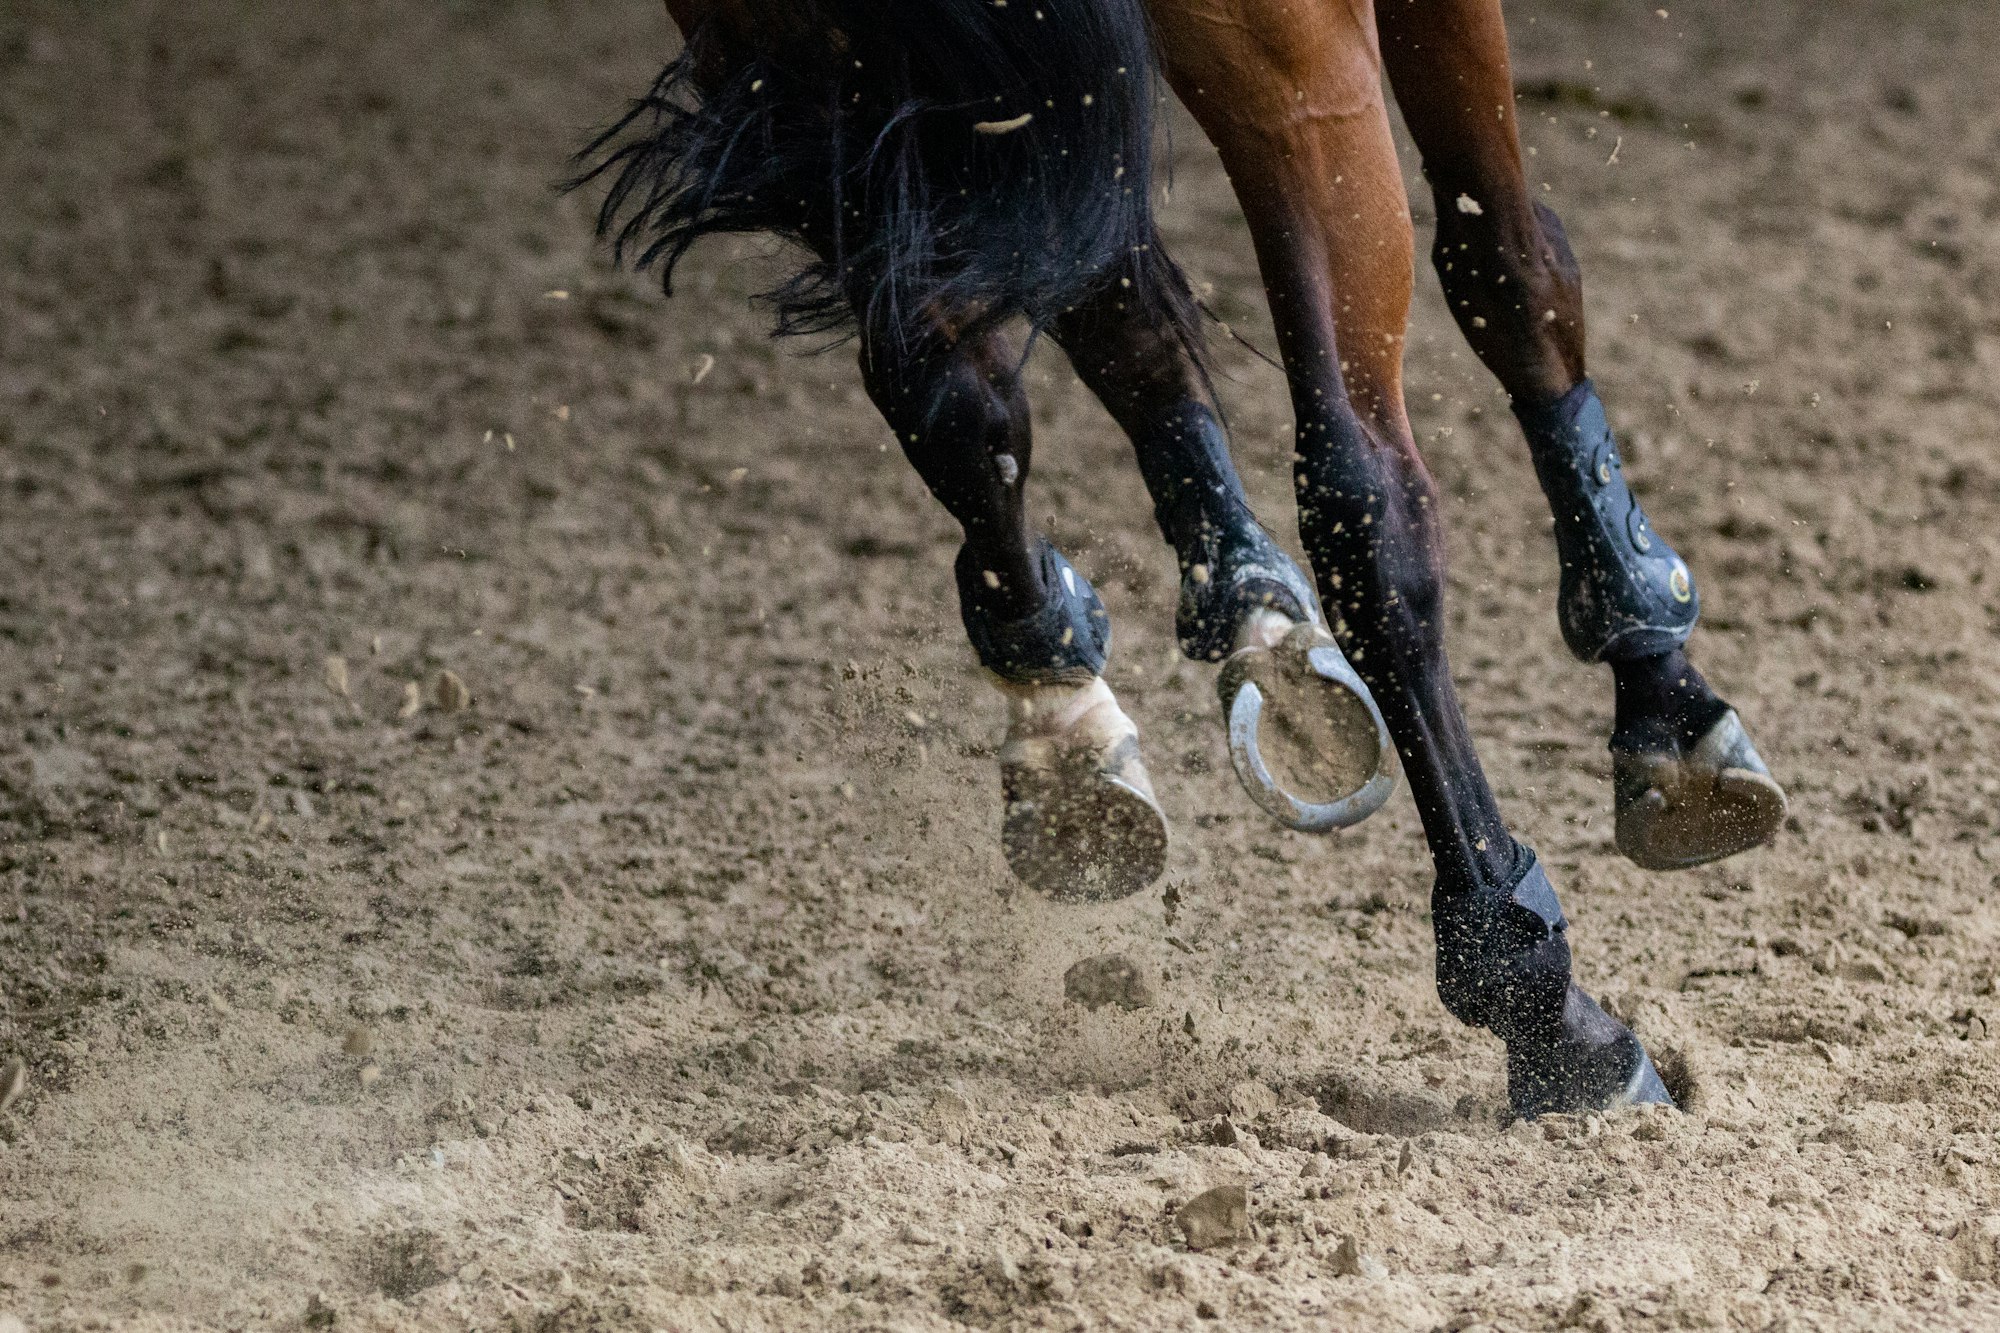 Fun Fact Friday! Why Do Horses Need Shoes? They're Not for Luck